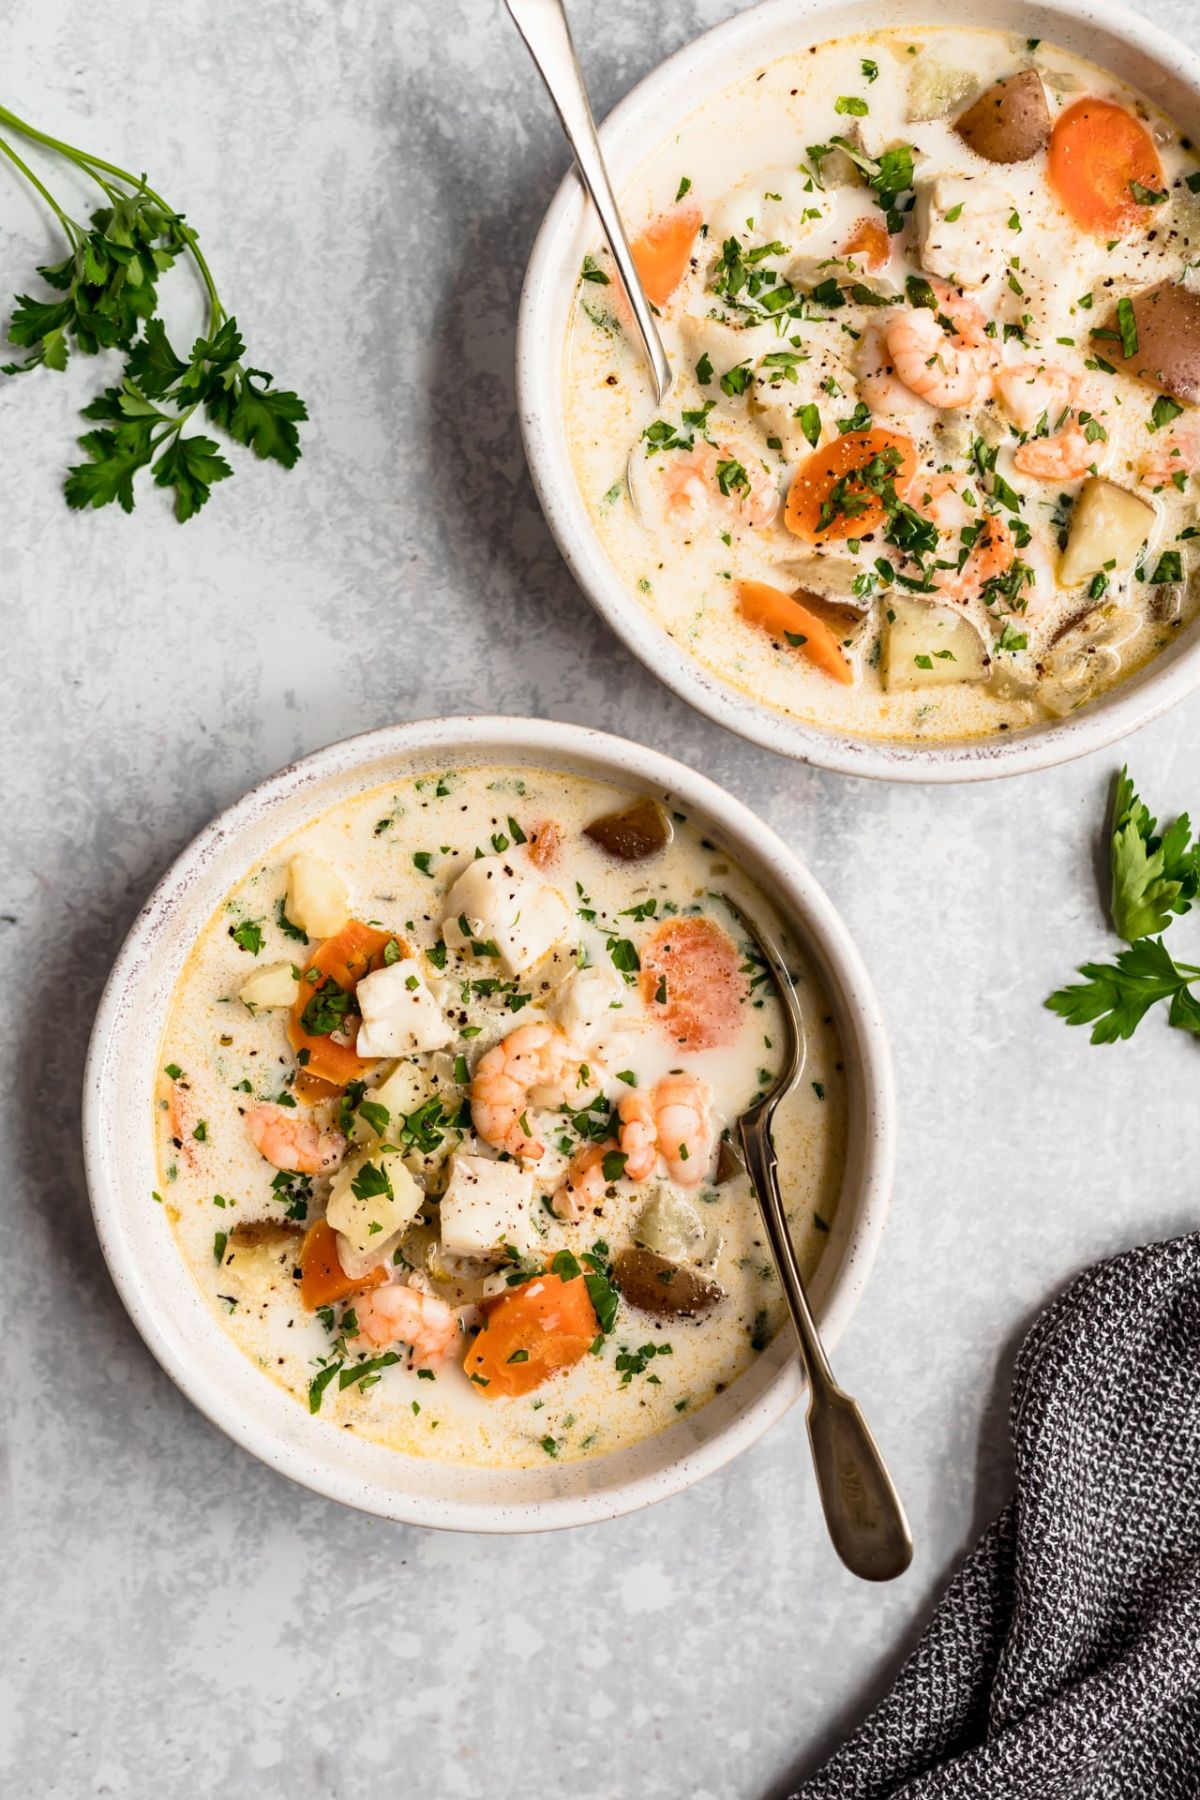 Soup with shrimp, fish, potatoes and carrots in white bowls.